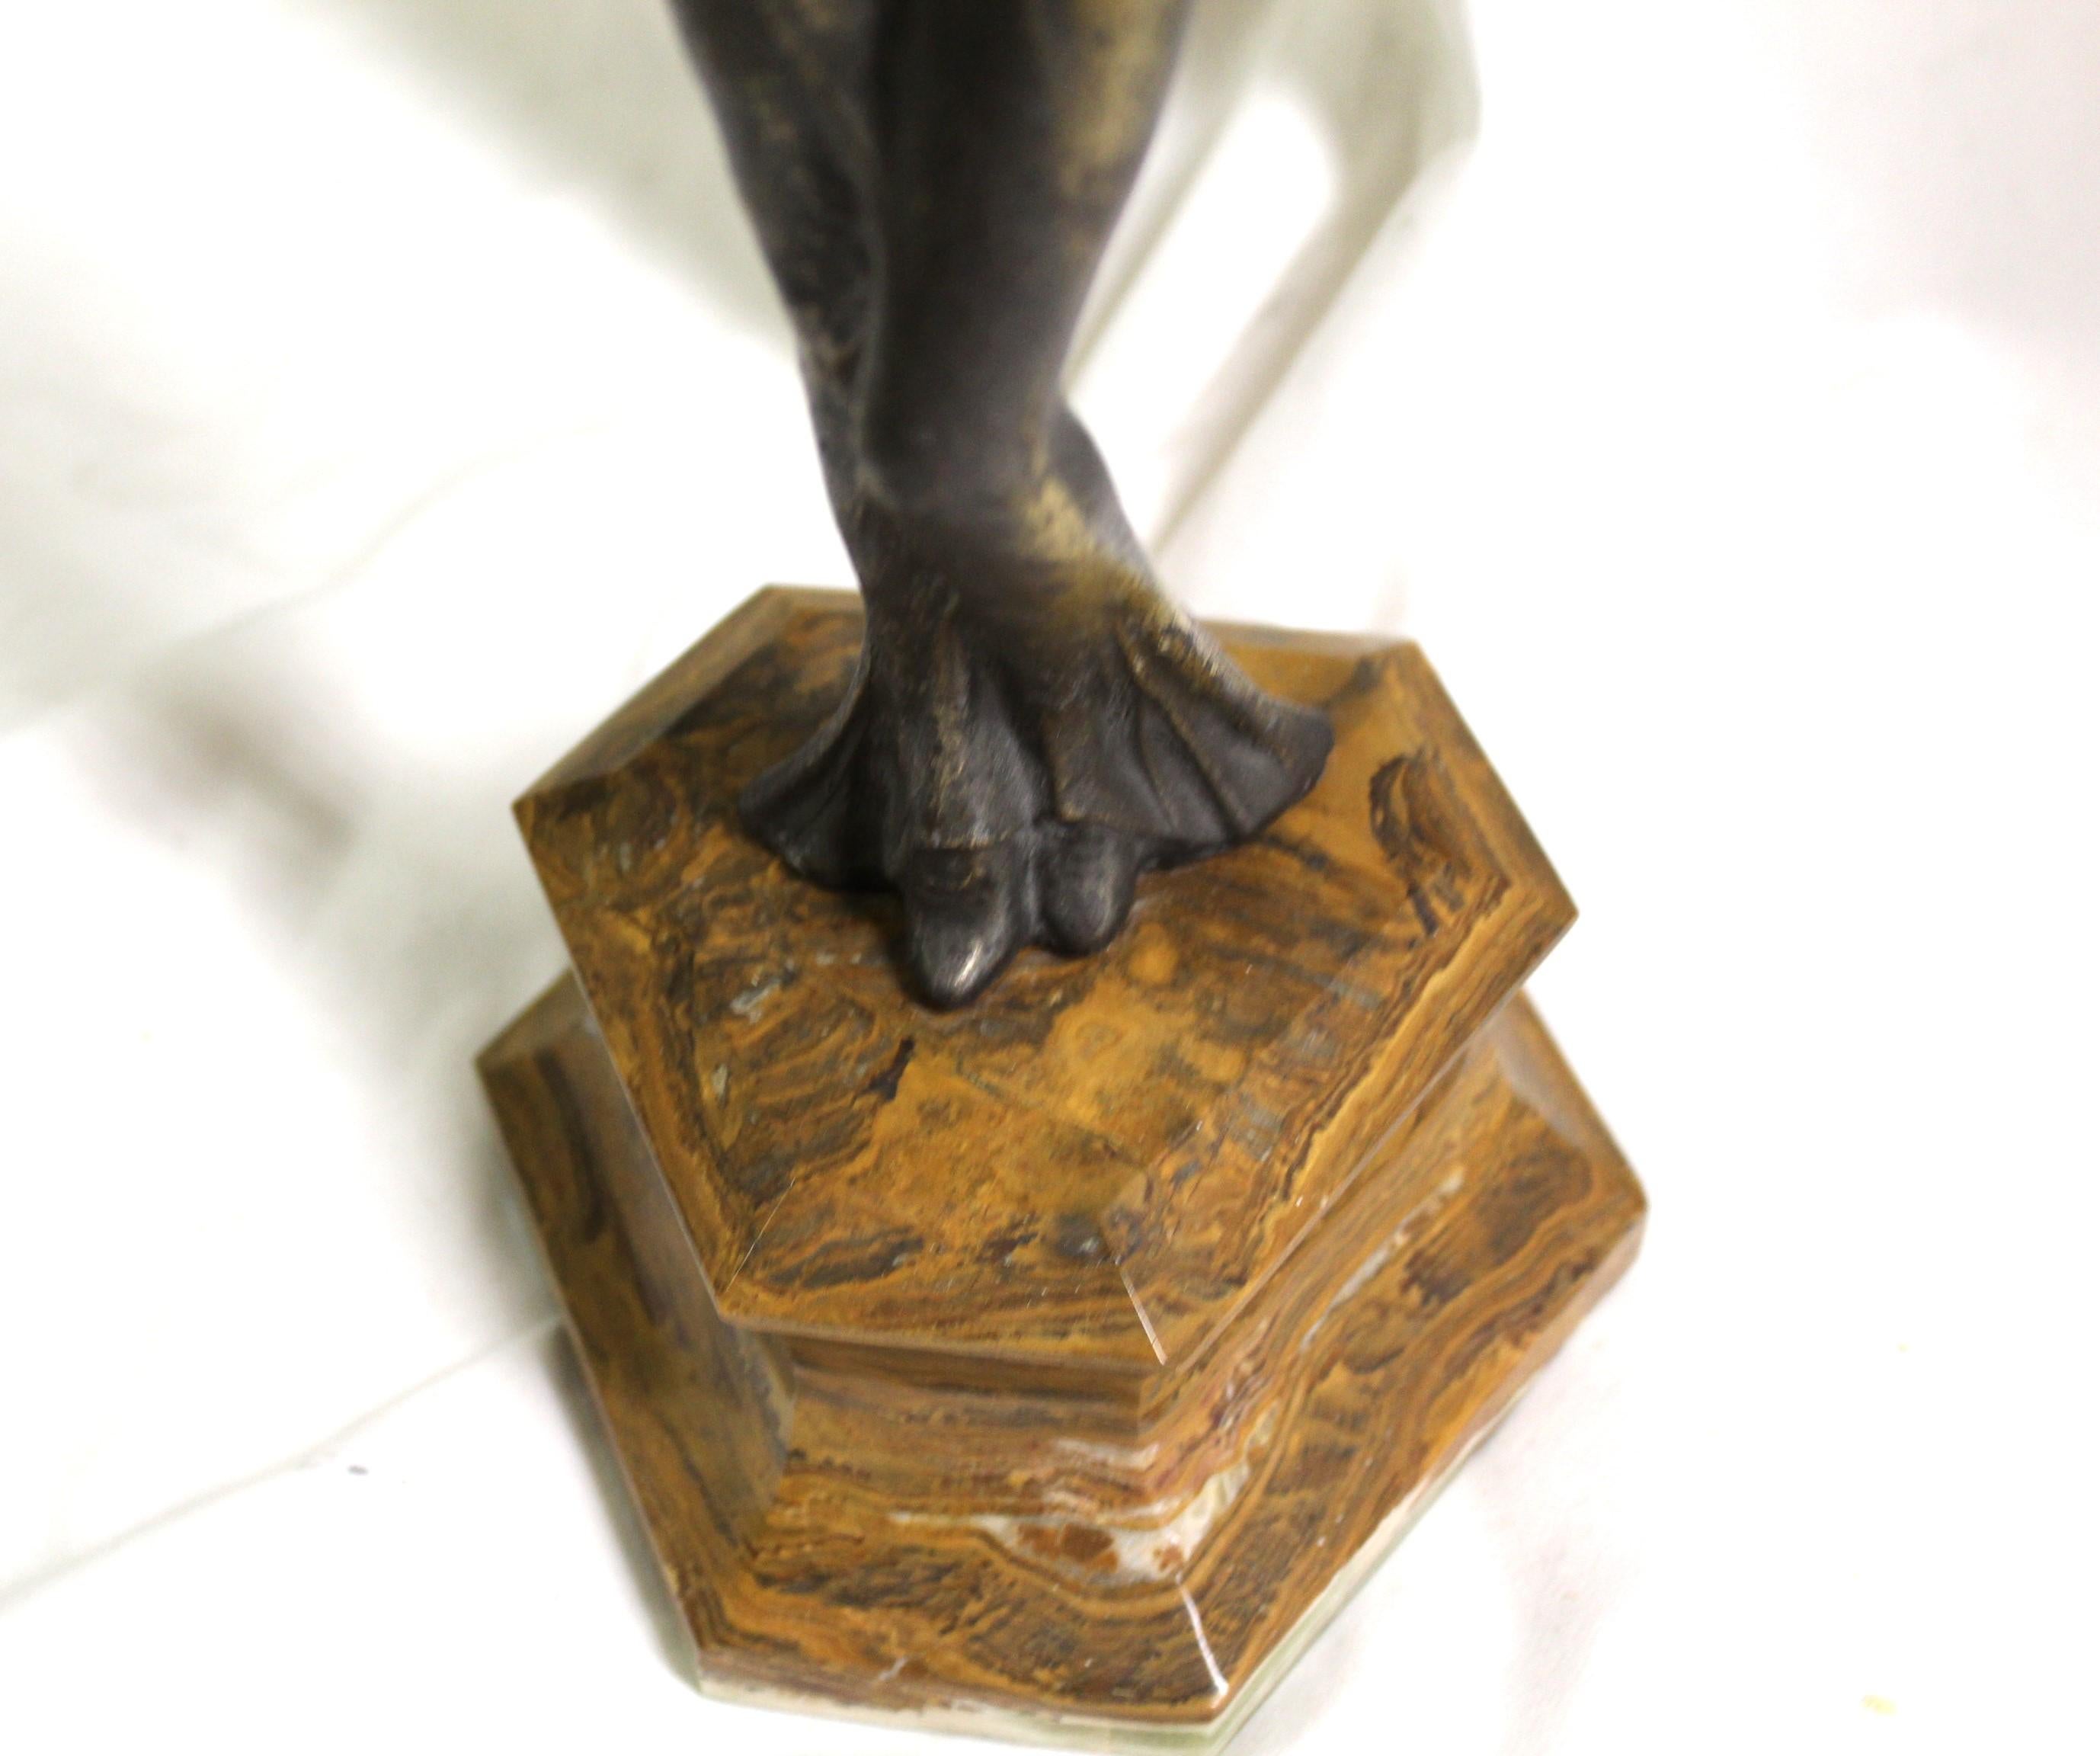 A very popular Figurine in the Art Deco look . A lady figure standing with her arms out streached standing on a 3 sided Brown marble base . Cast in white metal with a bronze patina finish . Hands and head are made of (Ivorine ) . I believe her title